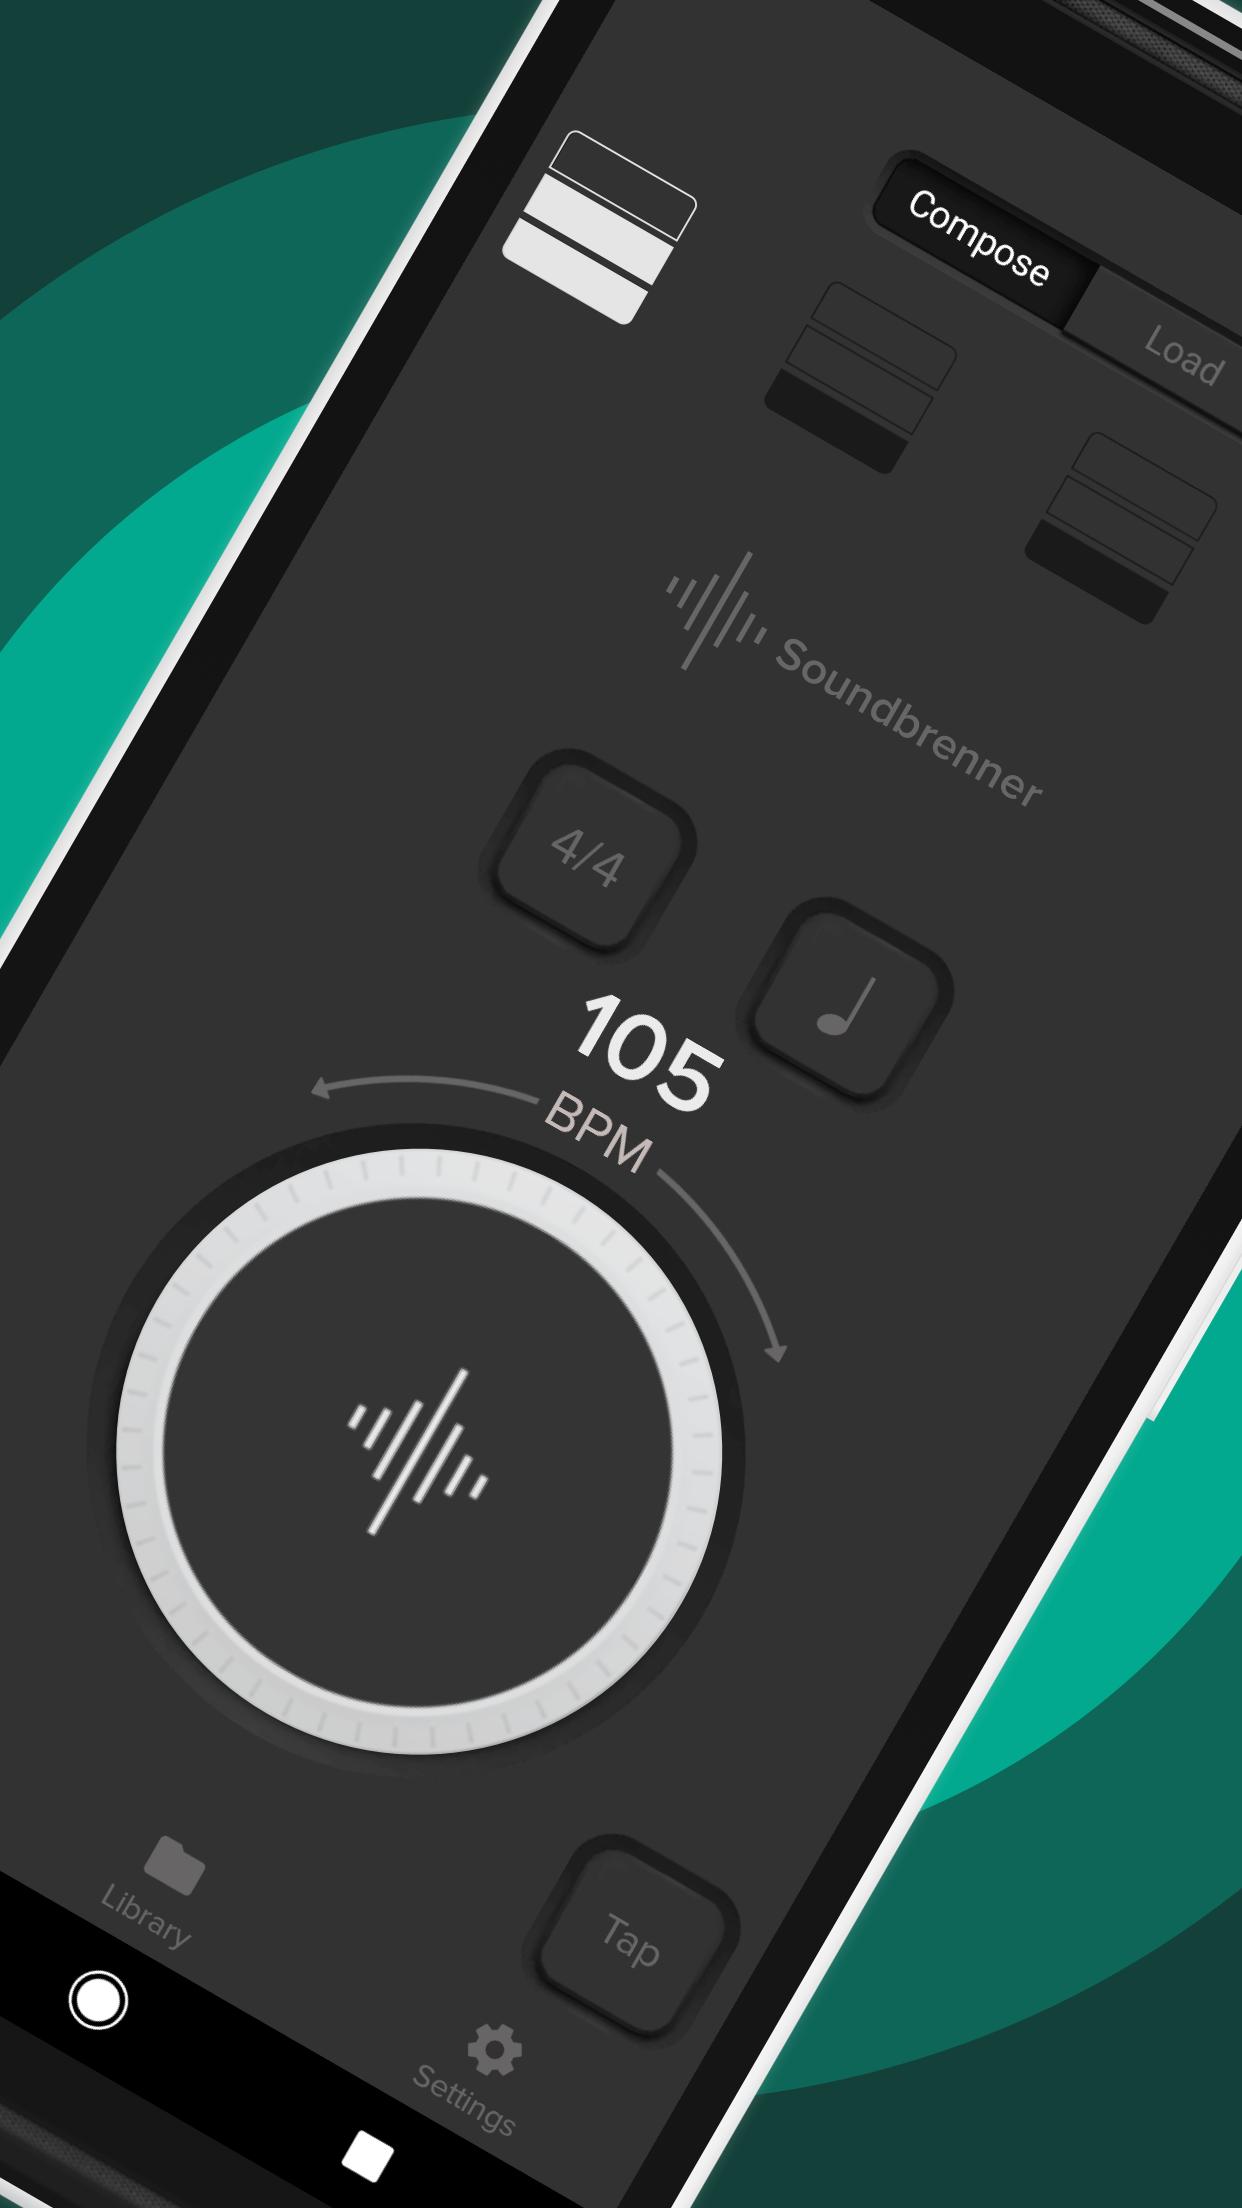 The Metronome by Soundbrenner for Android - APK Download